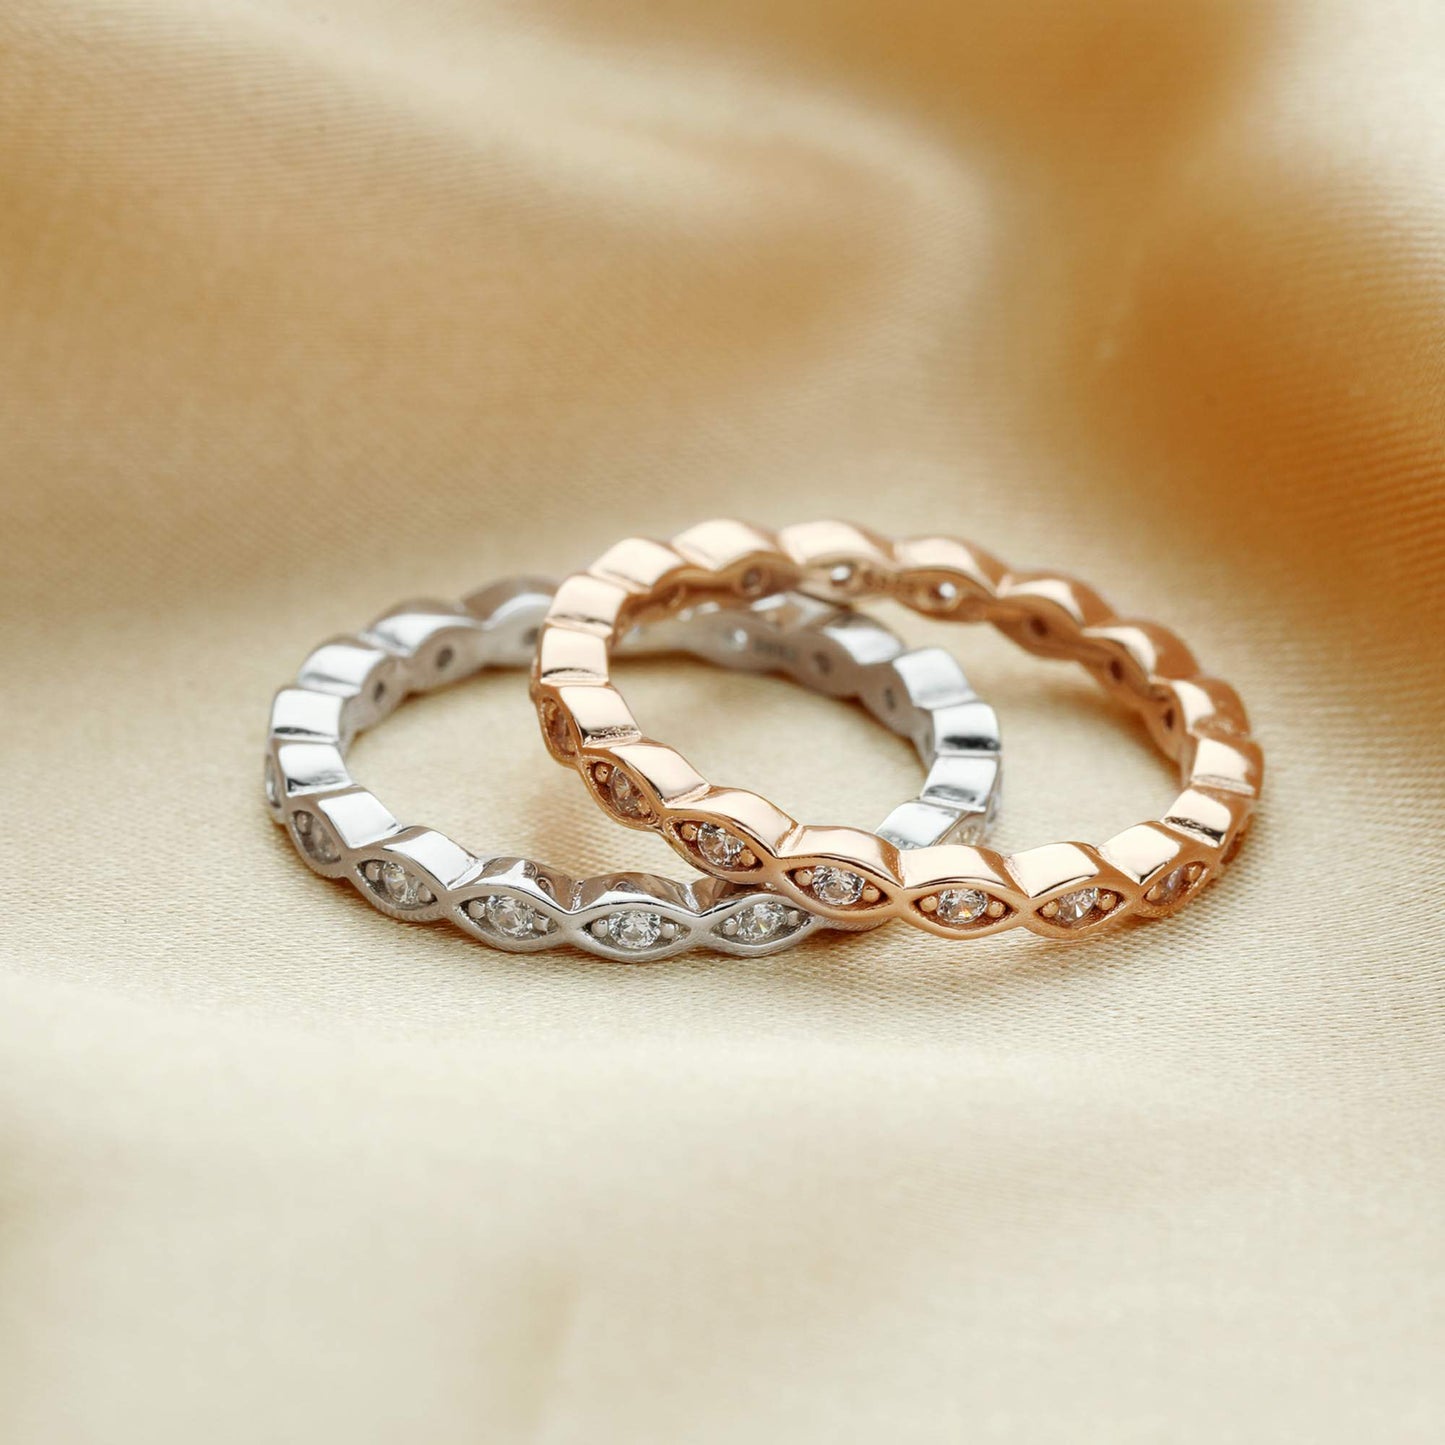 One silver and one rose gold scalloped ring band set with small clear stones.